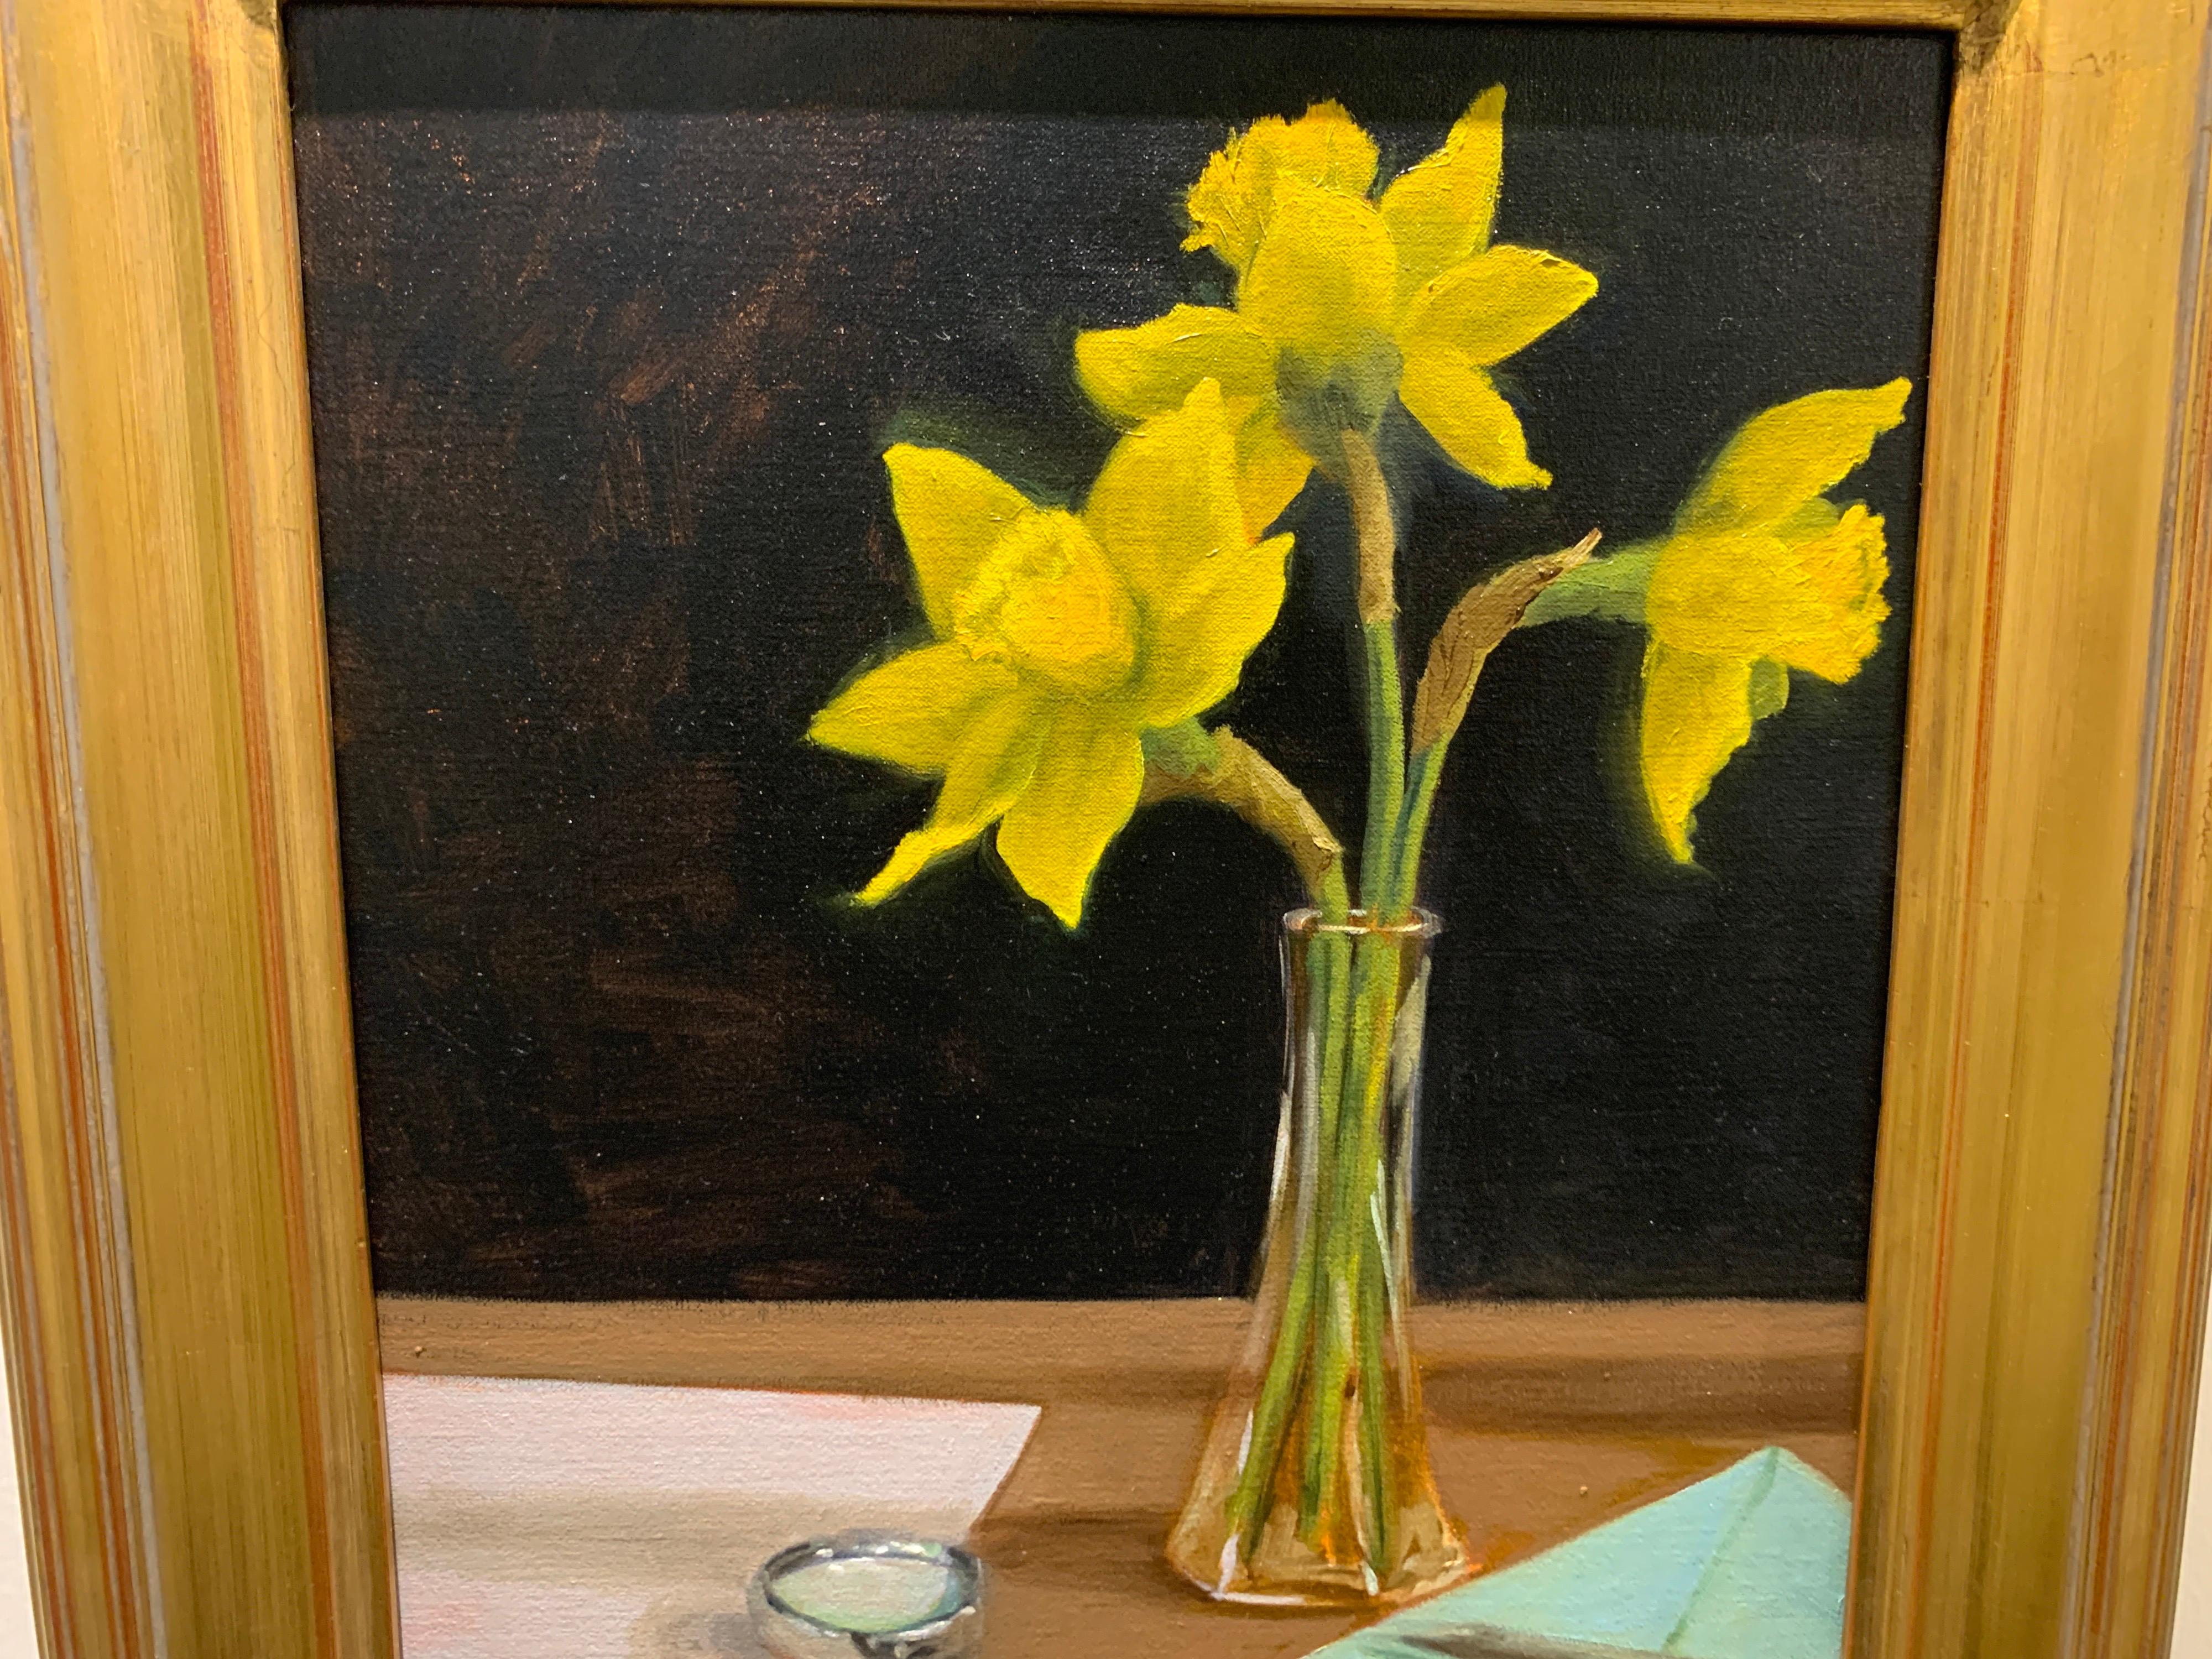 Searching for Signs of Spring by Ginny Williams, Framed Realist Painting 2